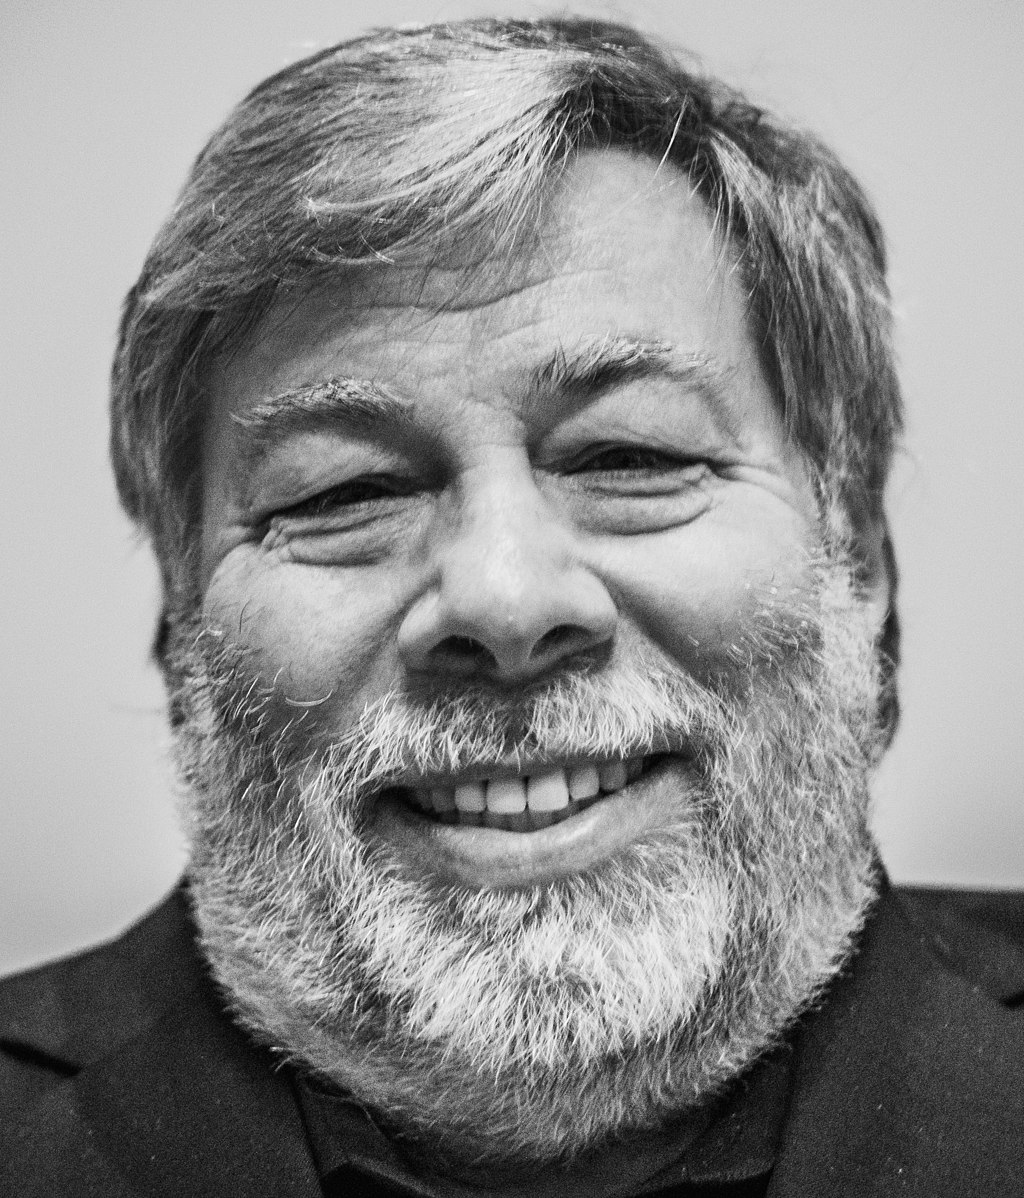  @stevewoz. Here we go. This guy's a real fuckin' champ. He practically invented the fucking Personal Computer. Before he invented the Apple I in 1976 there really wasn't anything like a "WYSIWYG" computer lying around. Computers were basically inaccessible to the layman.